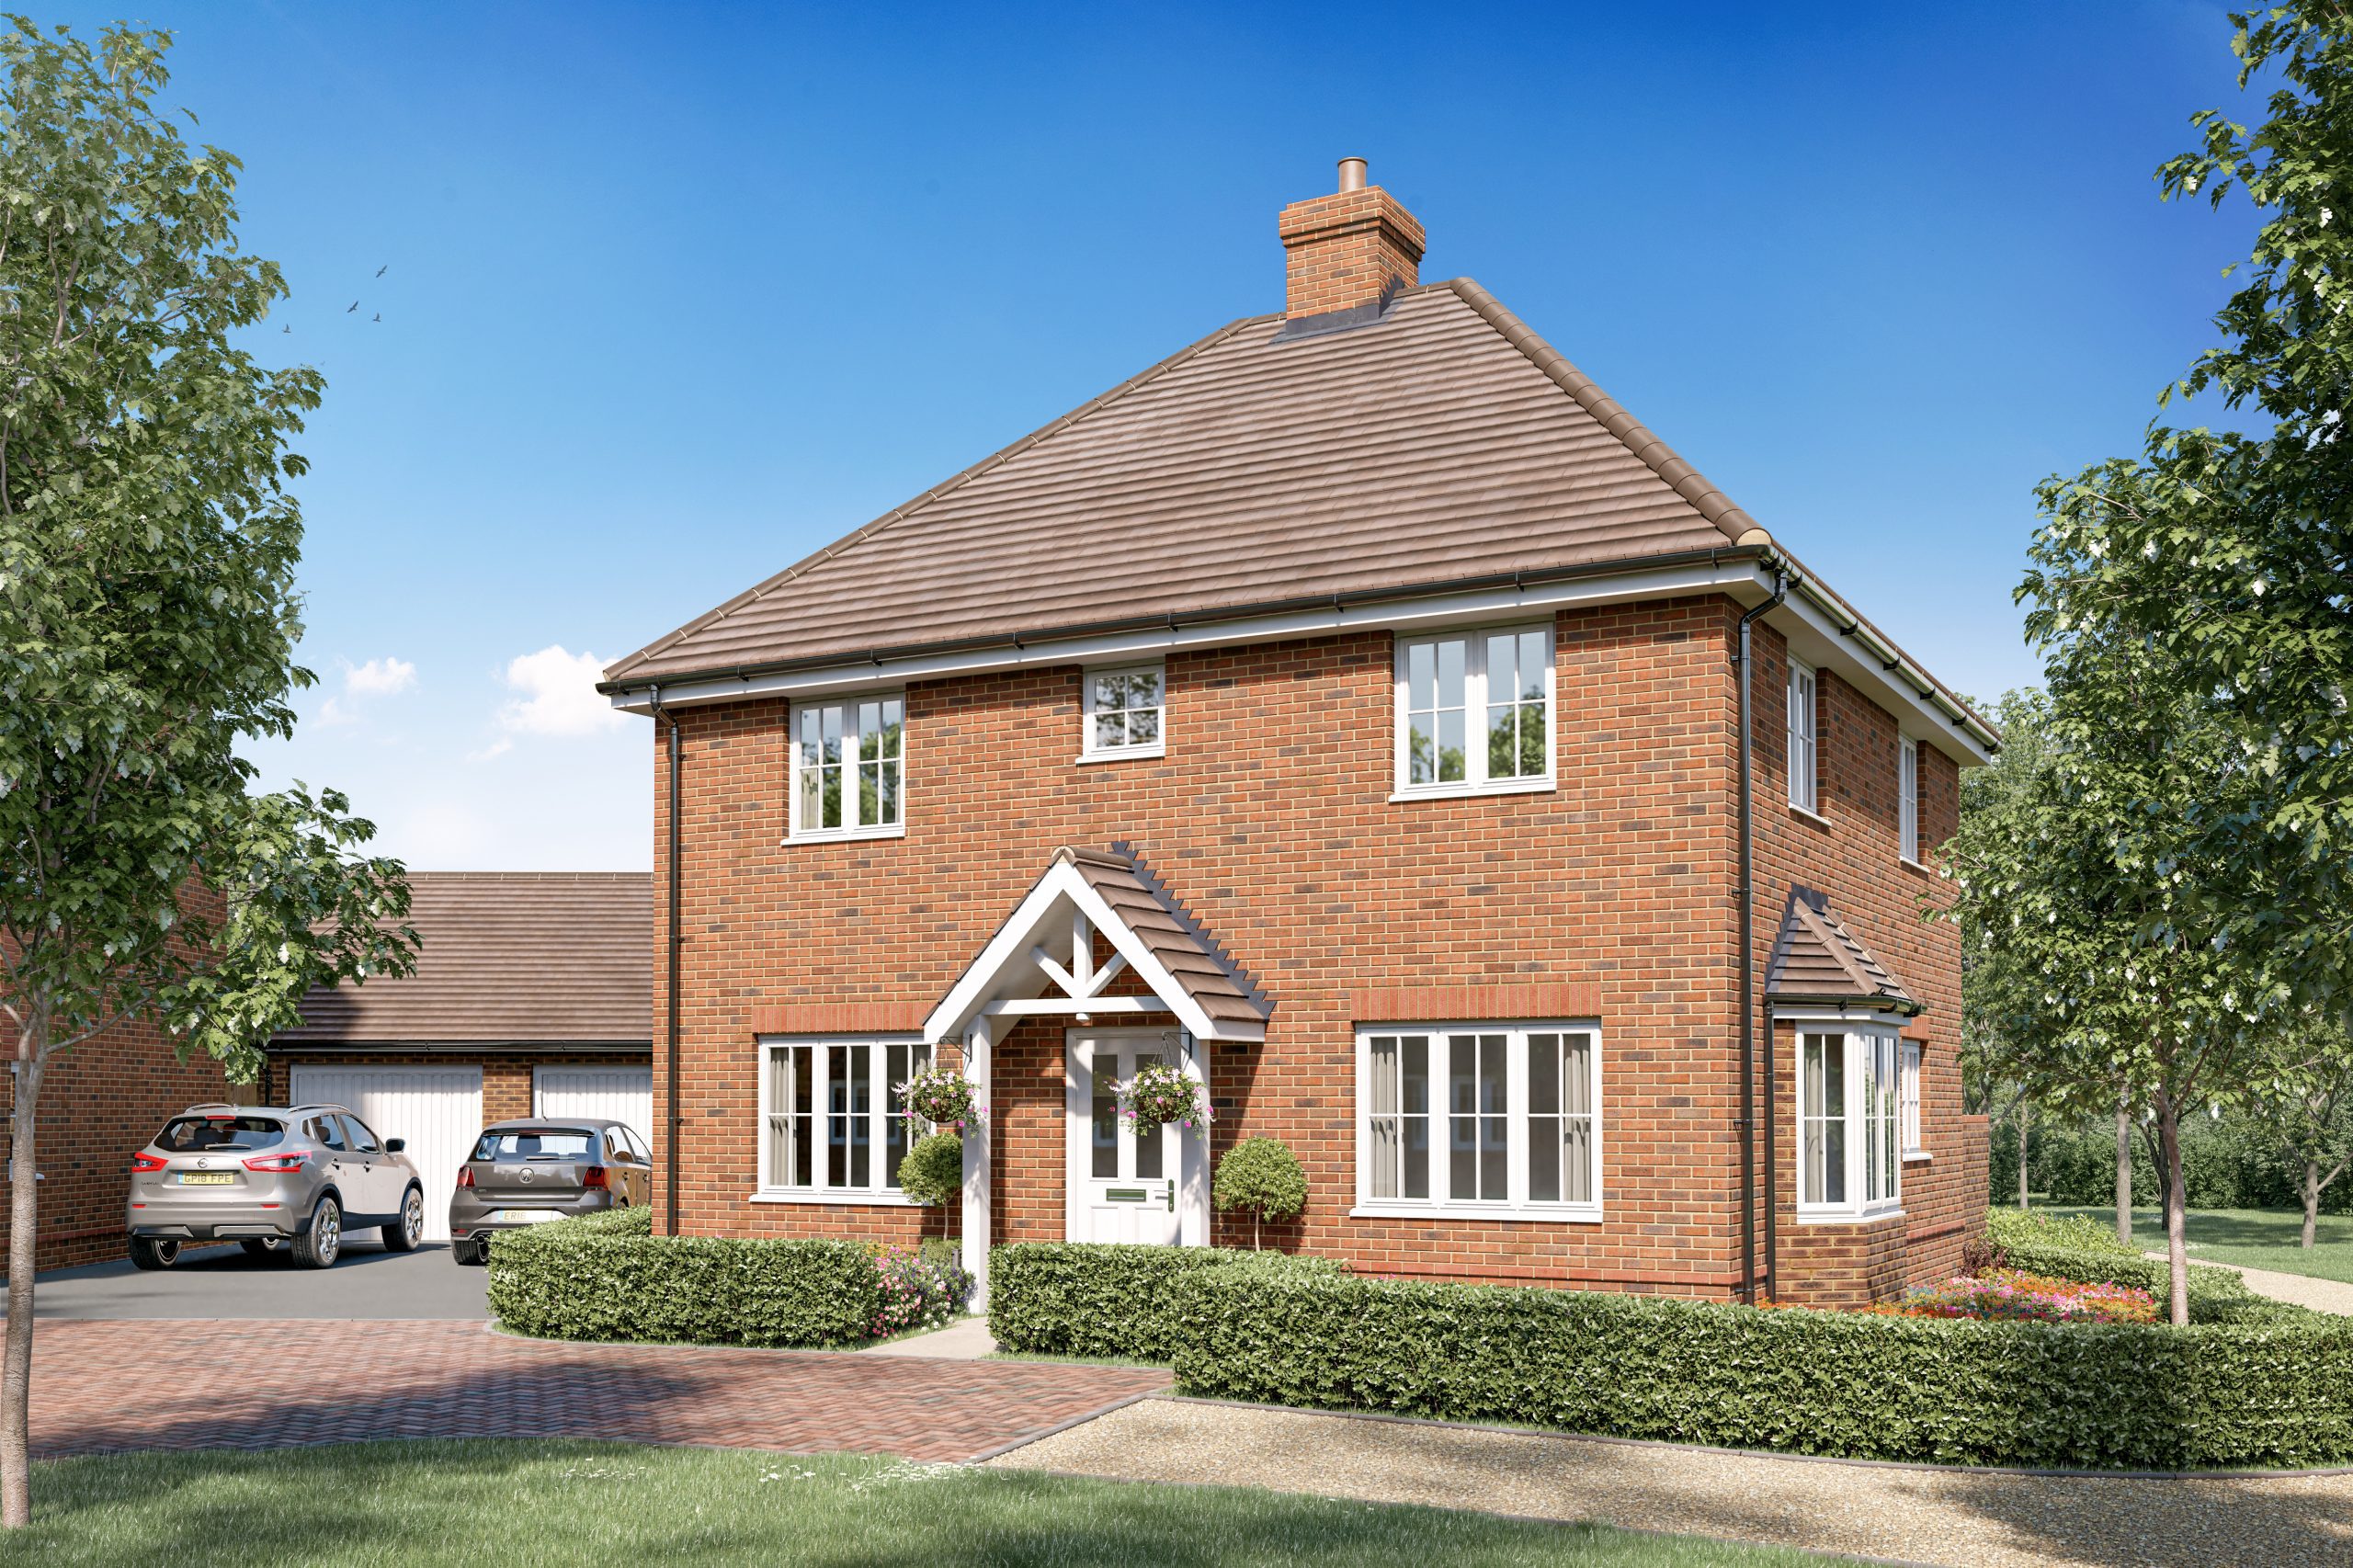 We’re putting the spotlight on Plot 17 at Pebble Gate Place, Sandwich this week.